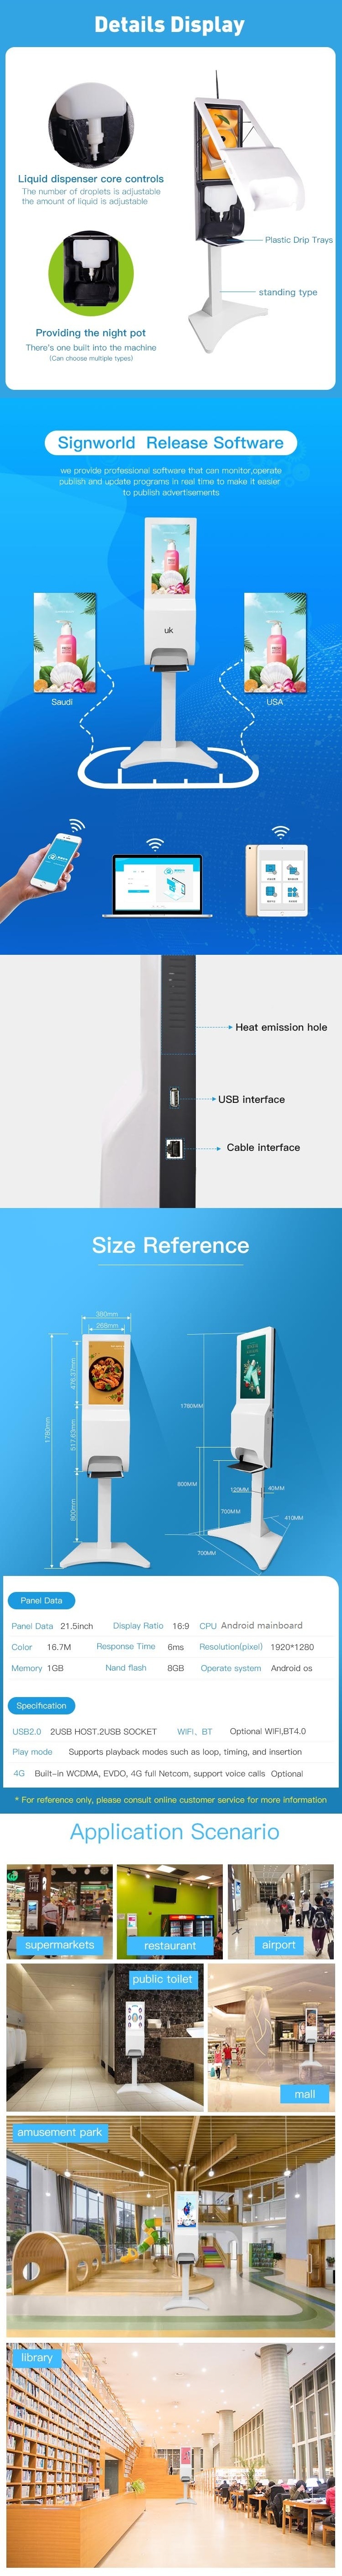 21.5 Inch Android Digital Signage LCD Advertising Display Internet Ad Player Automatic Hand Sanitizer Dispenser Kiosk